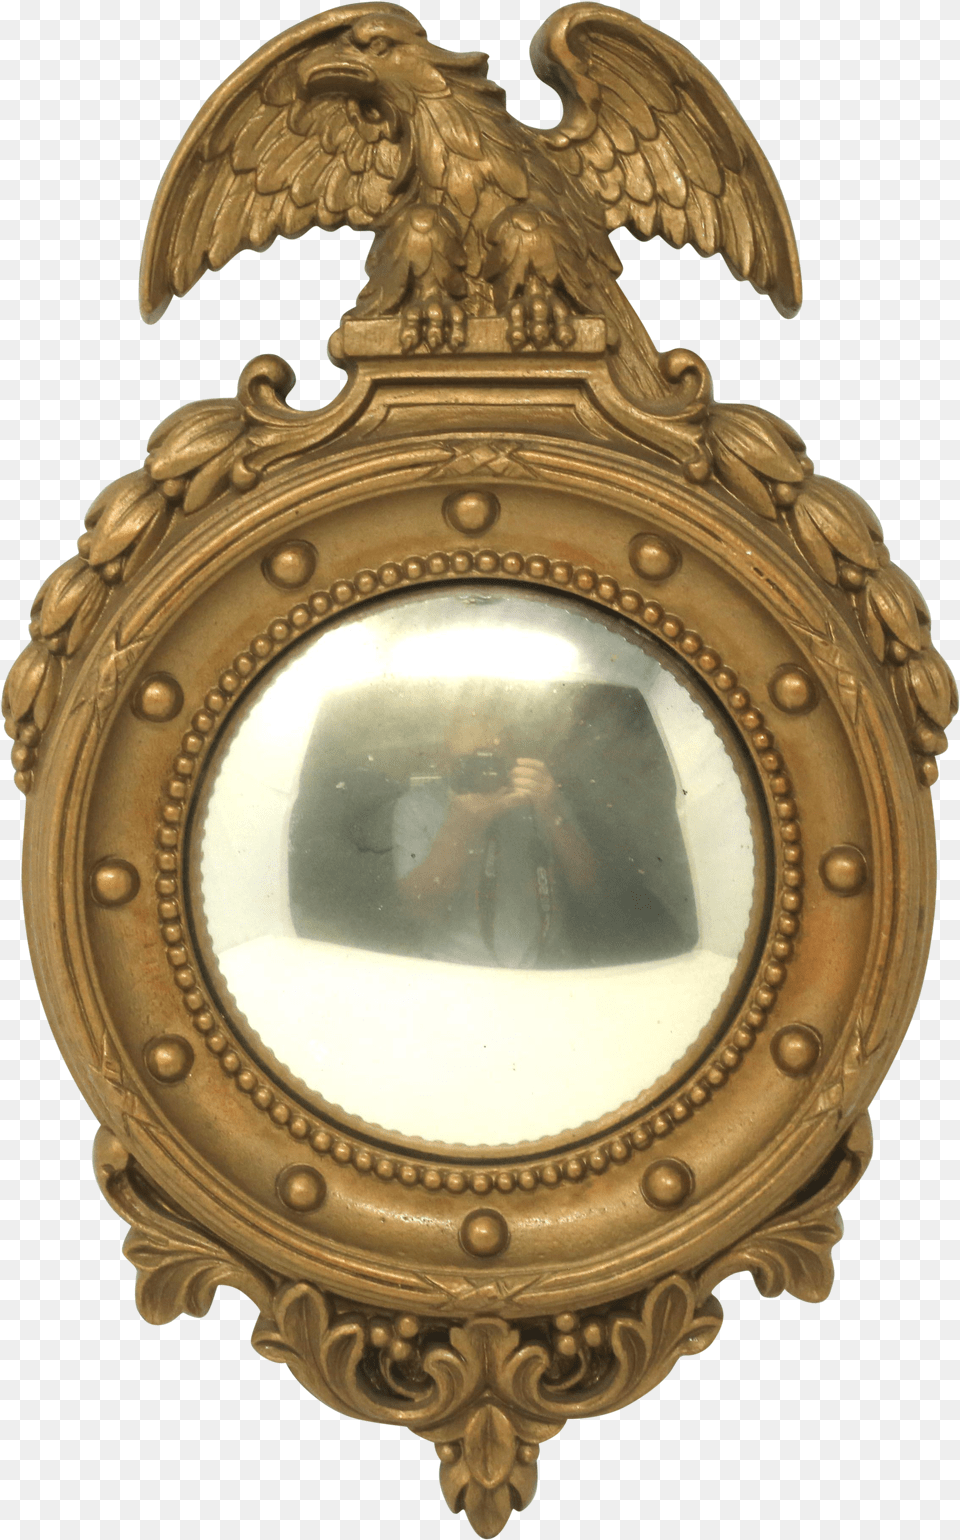 Vintage Petite Syroco Wood Convex Porthole Federalist Antique Free Png Download